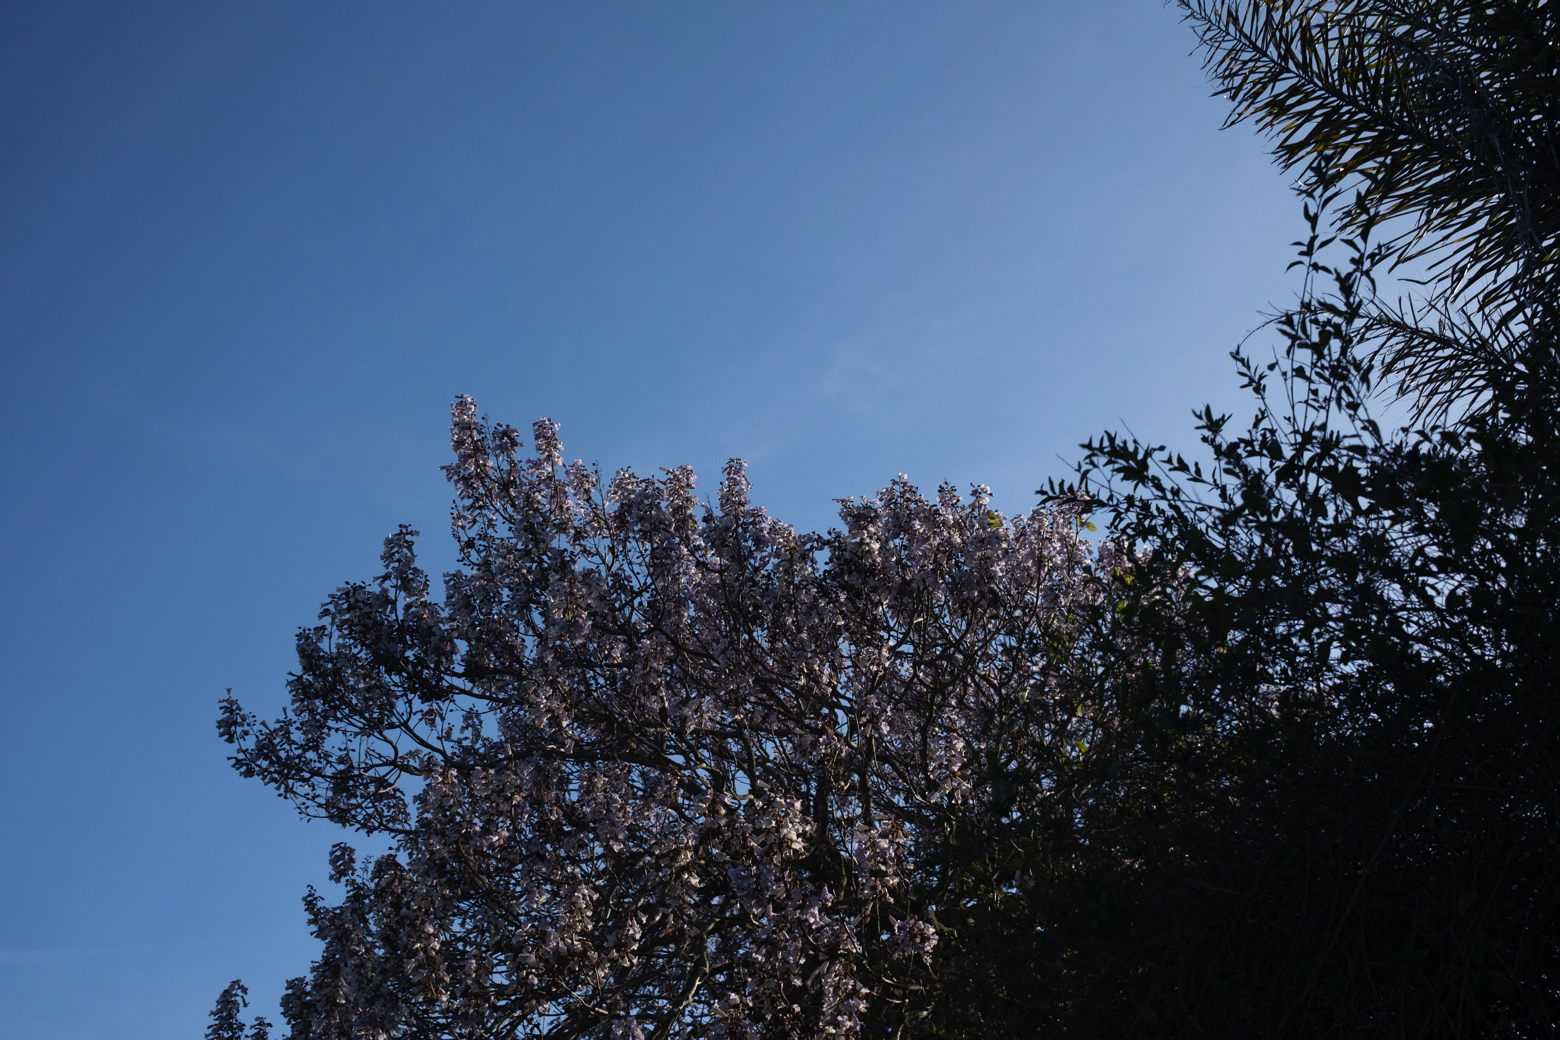 A tree with flowers on every branch stretches up into a big blue sky.